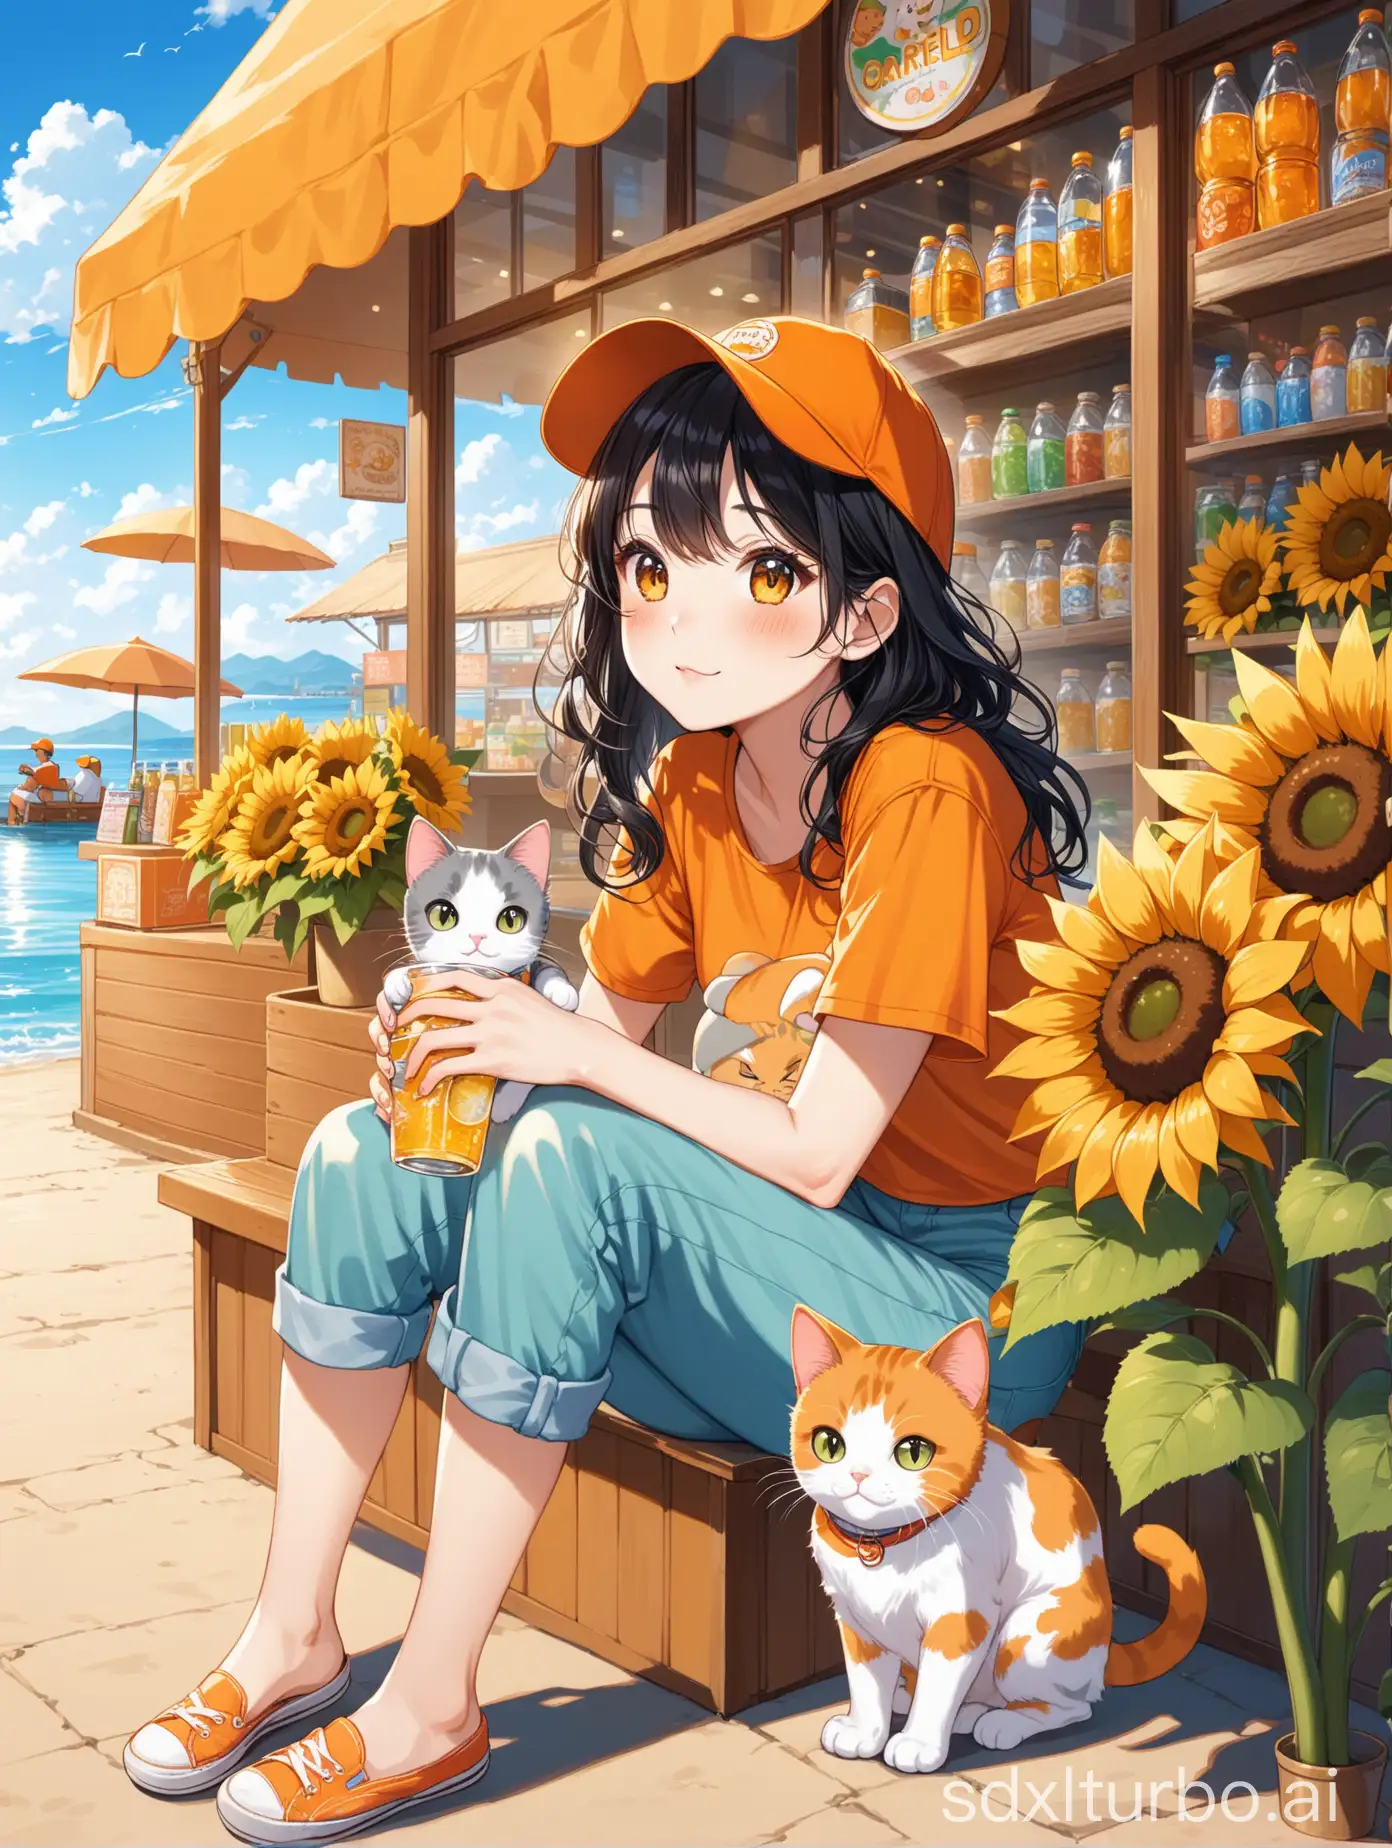 Woman-with-Black-Hair-Holding-Calico-and-Garfield-Cats-by-Seaside-Drink-Shop